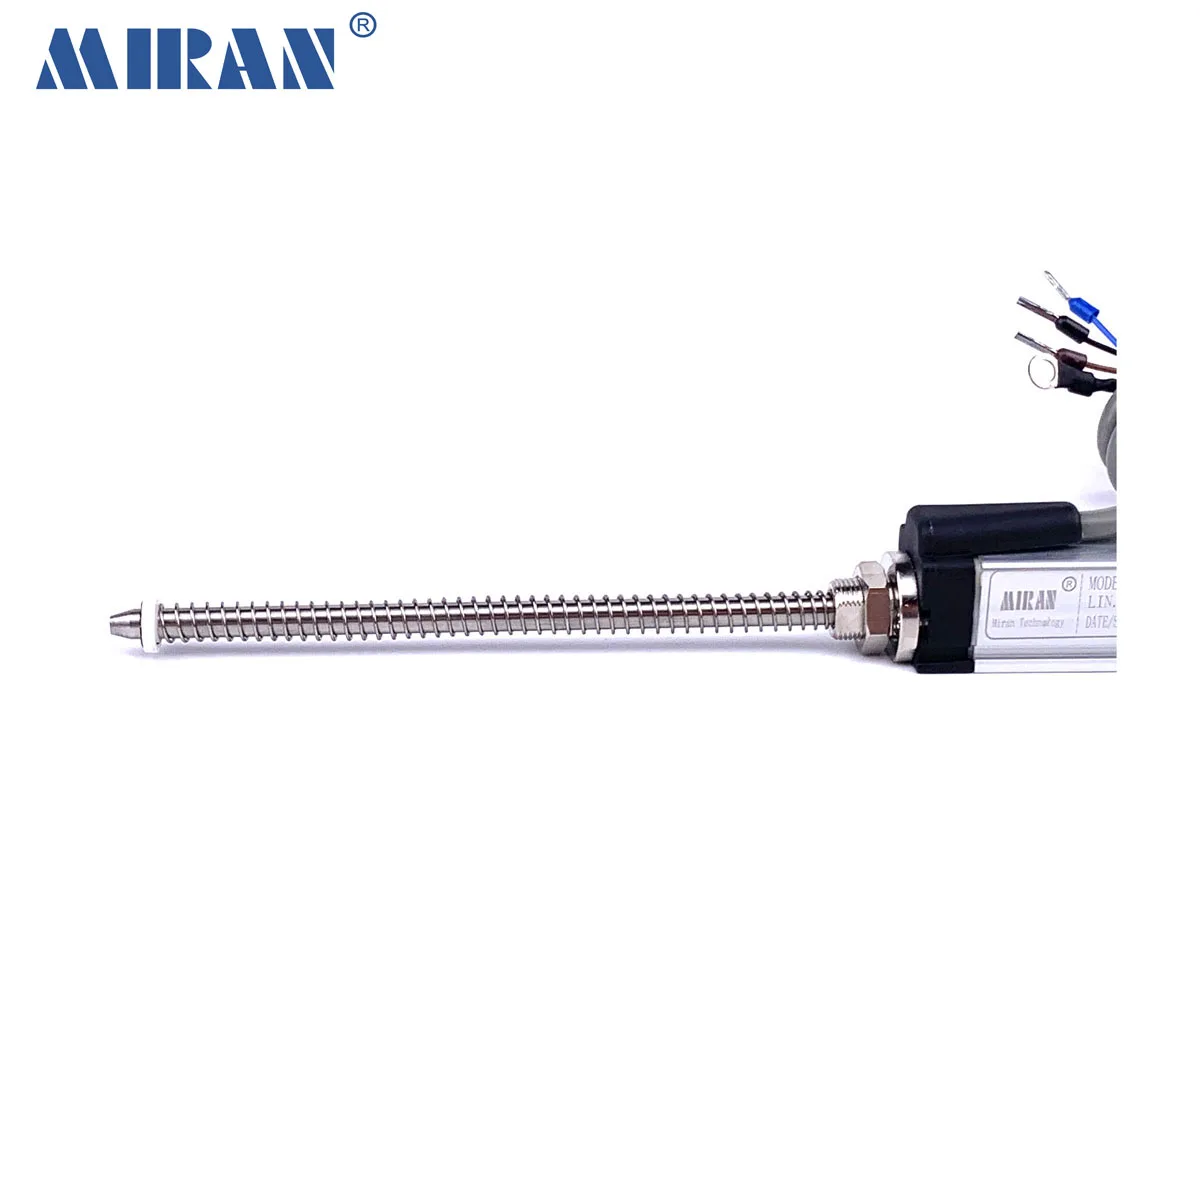 Miran Spring Self-return KTR2 10mm-25mm Displacement Transducer Accuracy 0.0005mm High Precision Linear Position Sensor/Scale enlarge